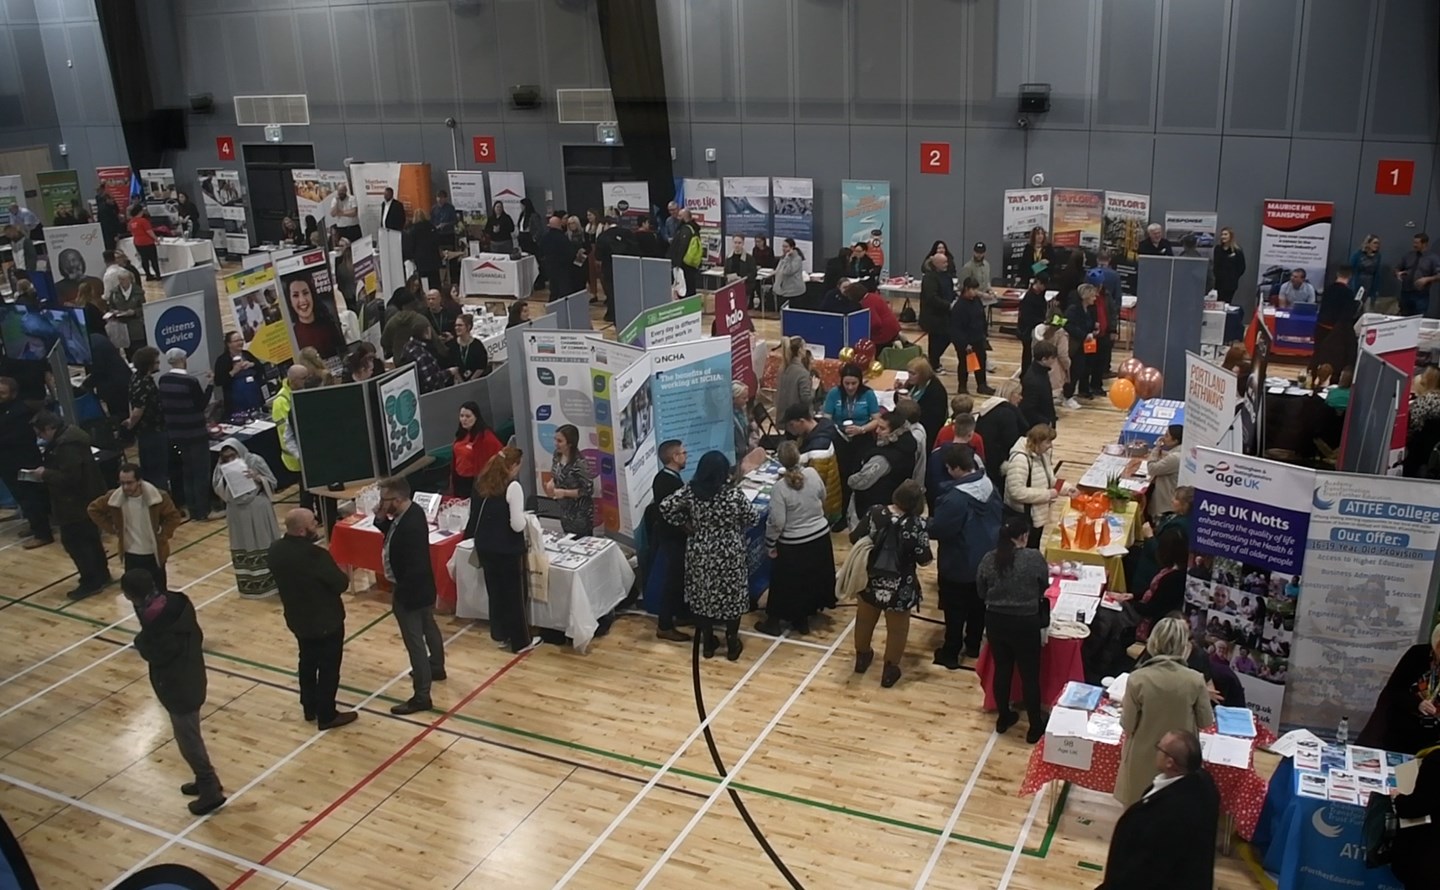 Photo looking over the whole 2022 Careers fair at Kirkby Leisure Centre 